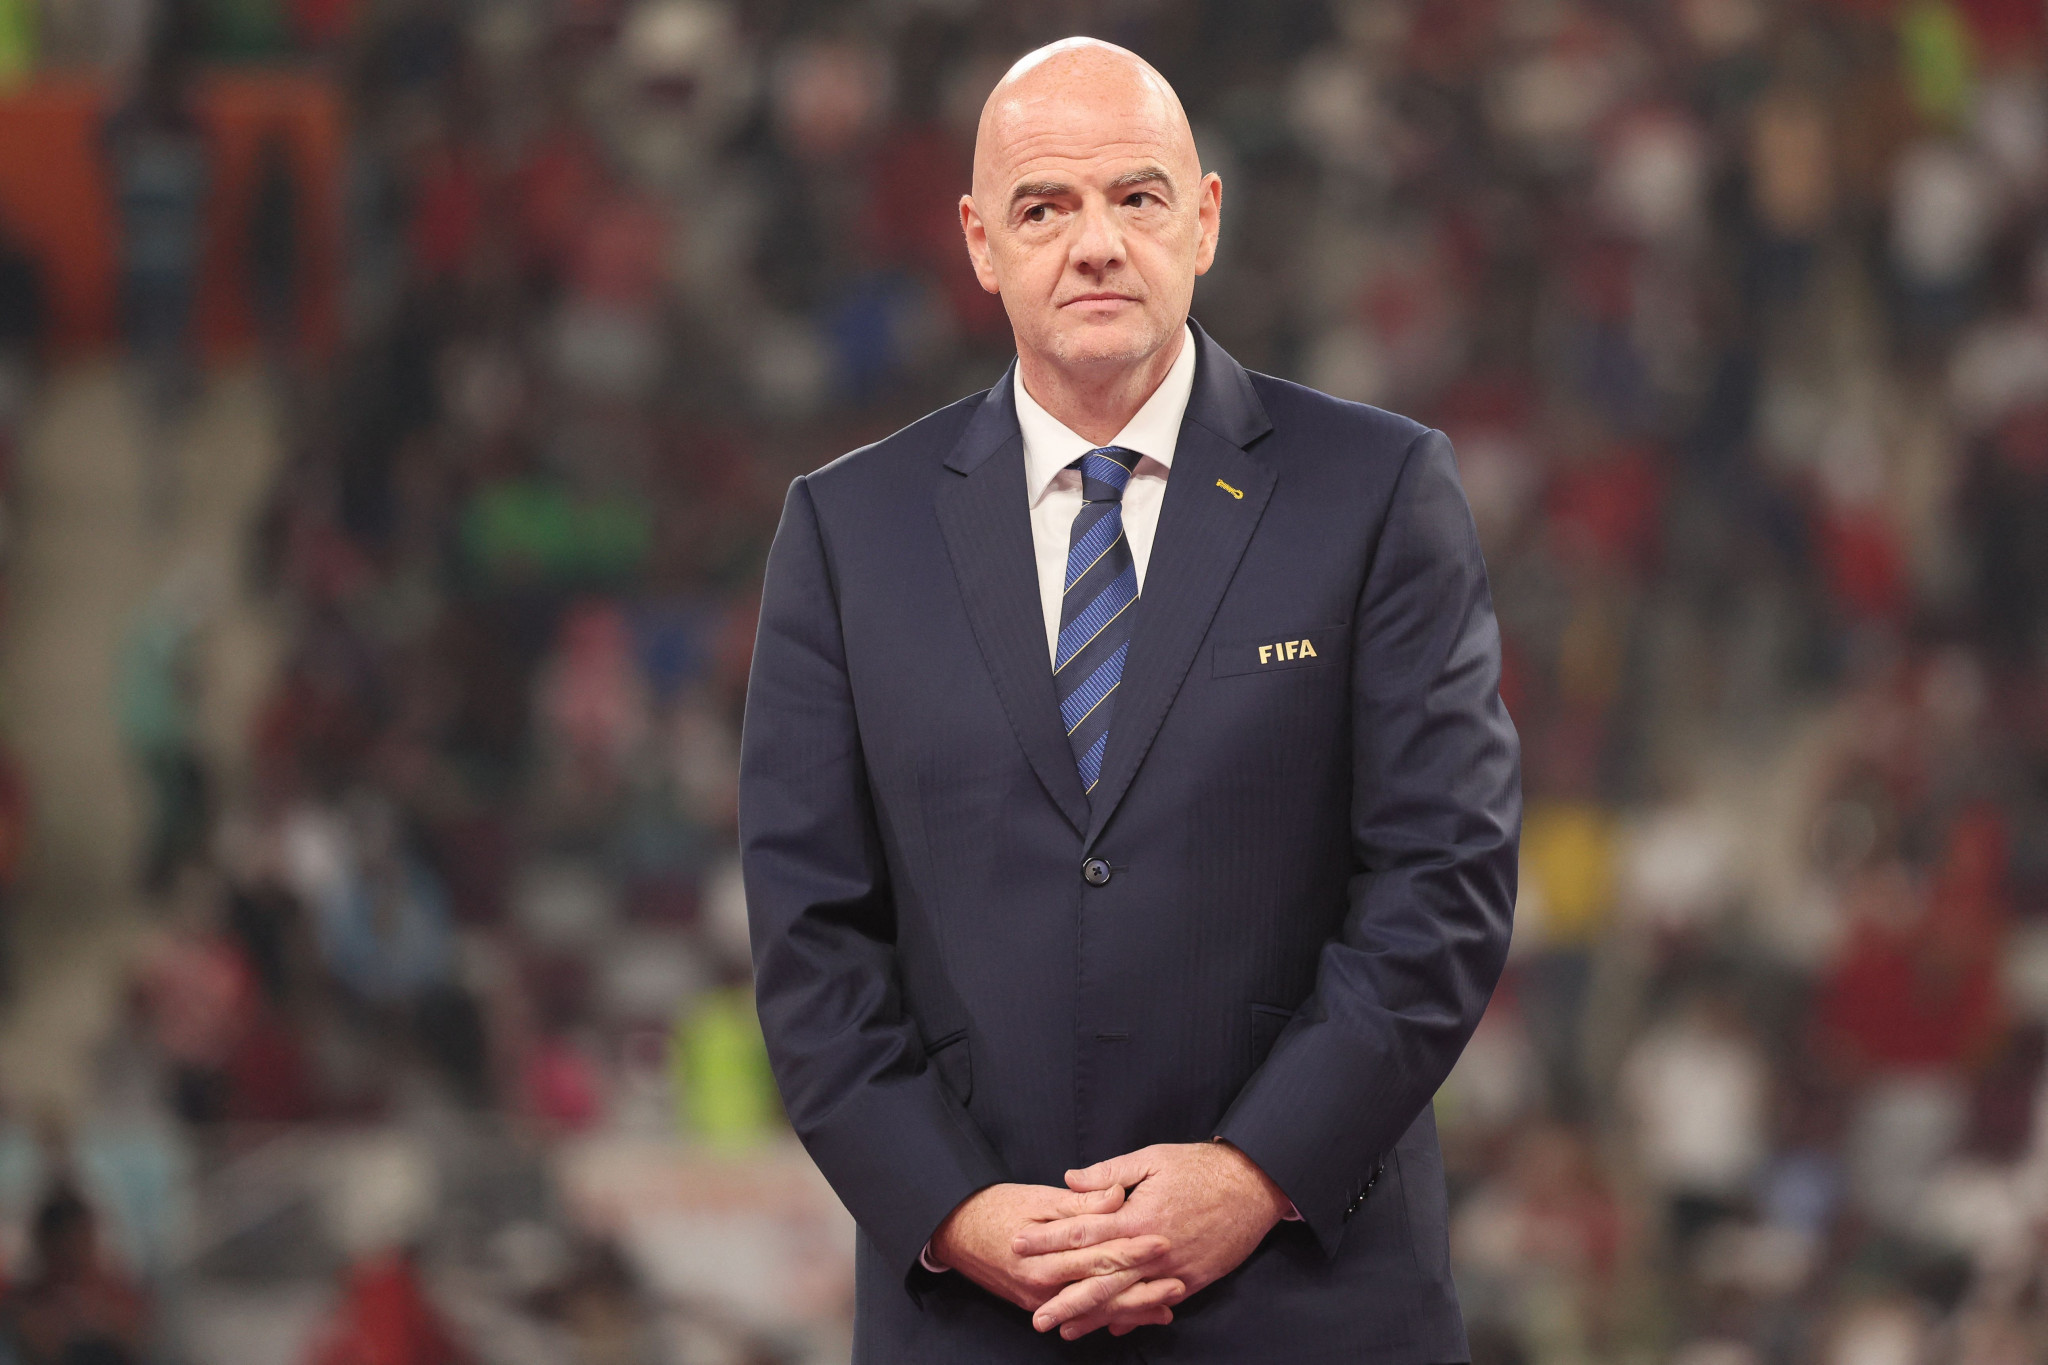 Gianni Infantino has always protested his innocence since the criminal case against him was launched in July 2020 ©Getty Images